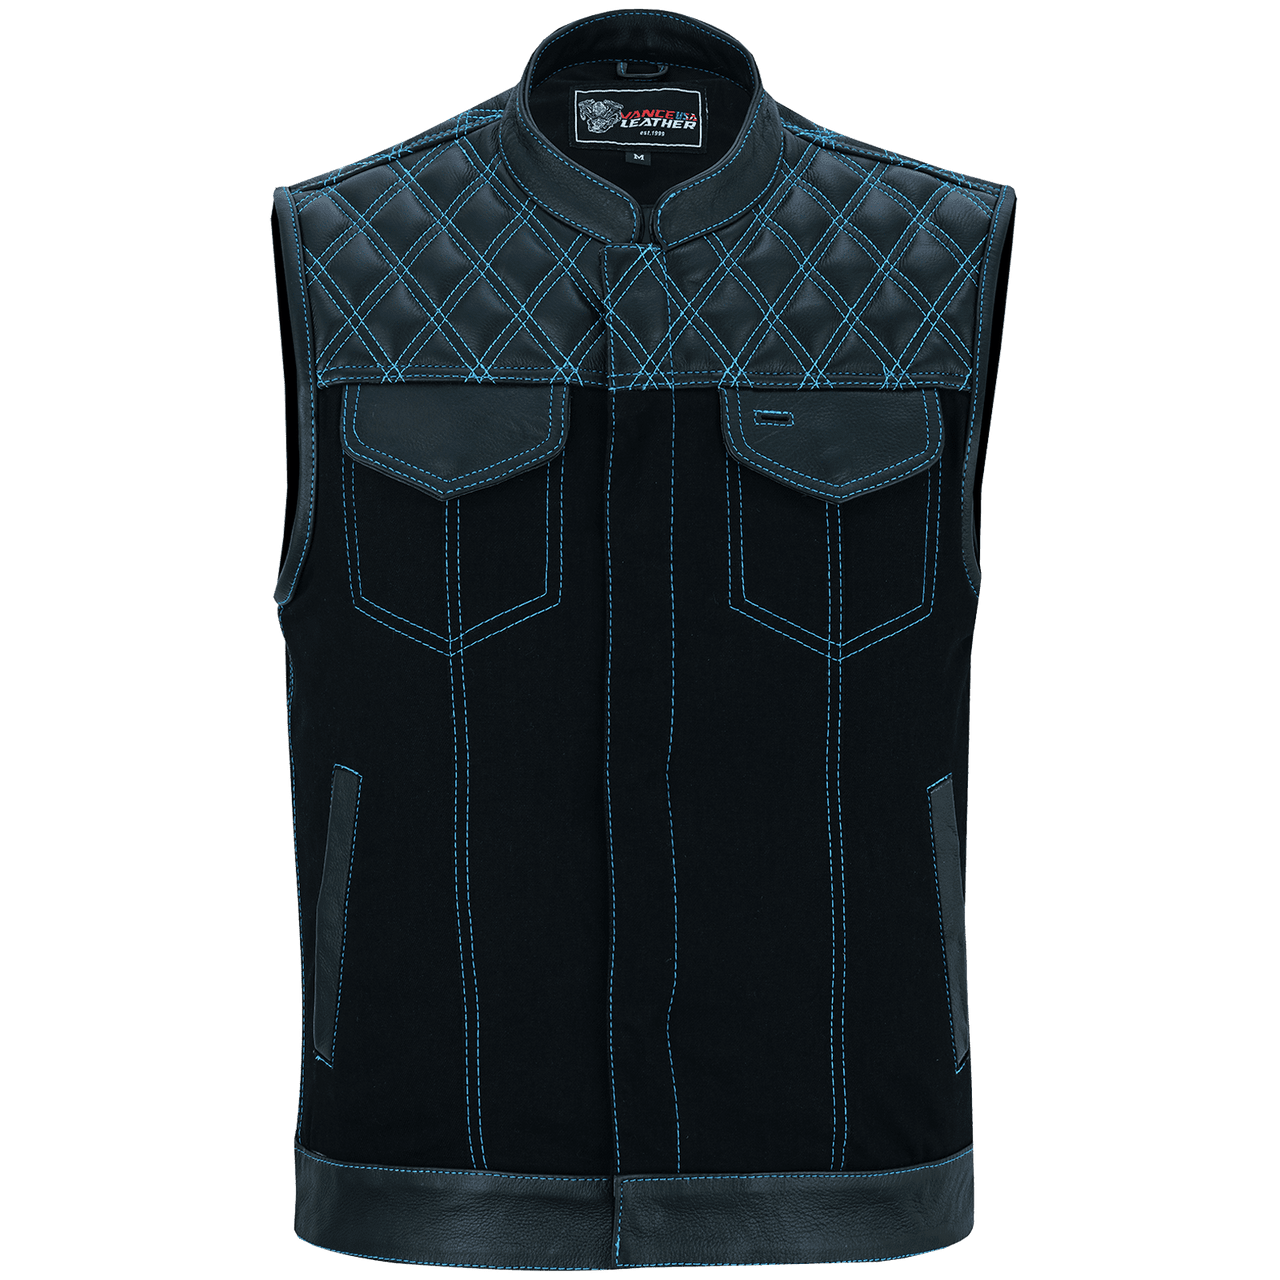 Vance-Leathers-VB924BL-Men's-Denim-Leather-Motorcycle-Vest-with-Blue-Stitching-front-view